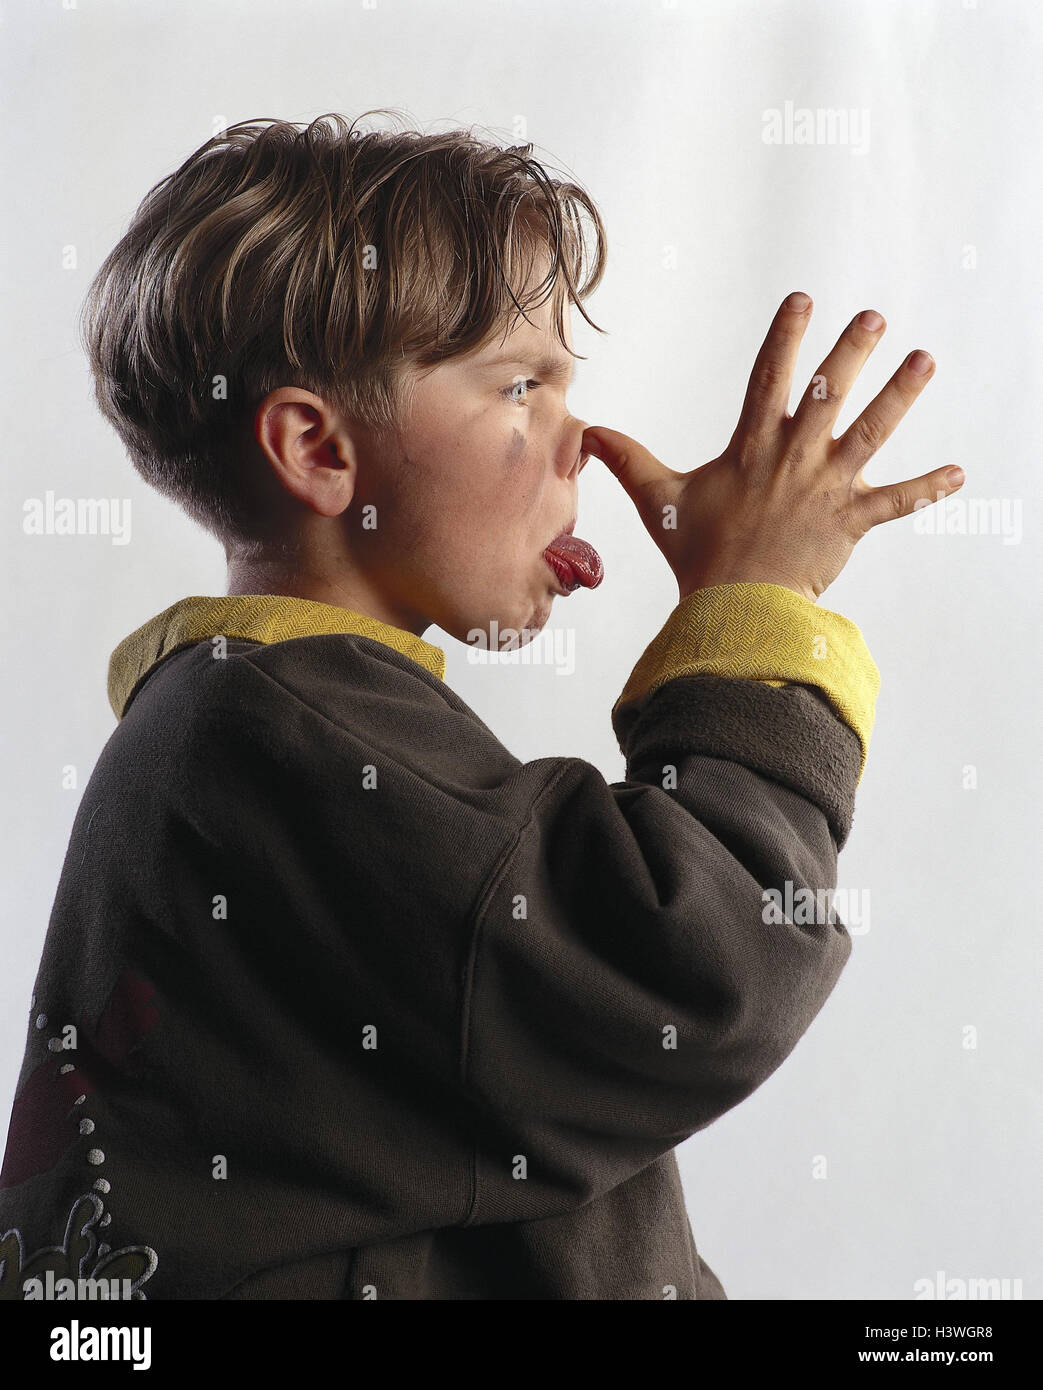 small boy, dirtily, gesture, "shows nose", stretches tongue out, page portrait mb 140 A10 Stock Photo